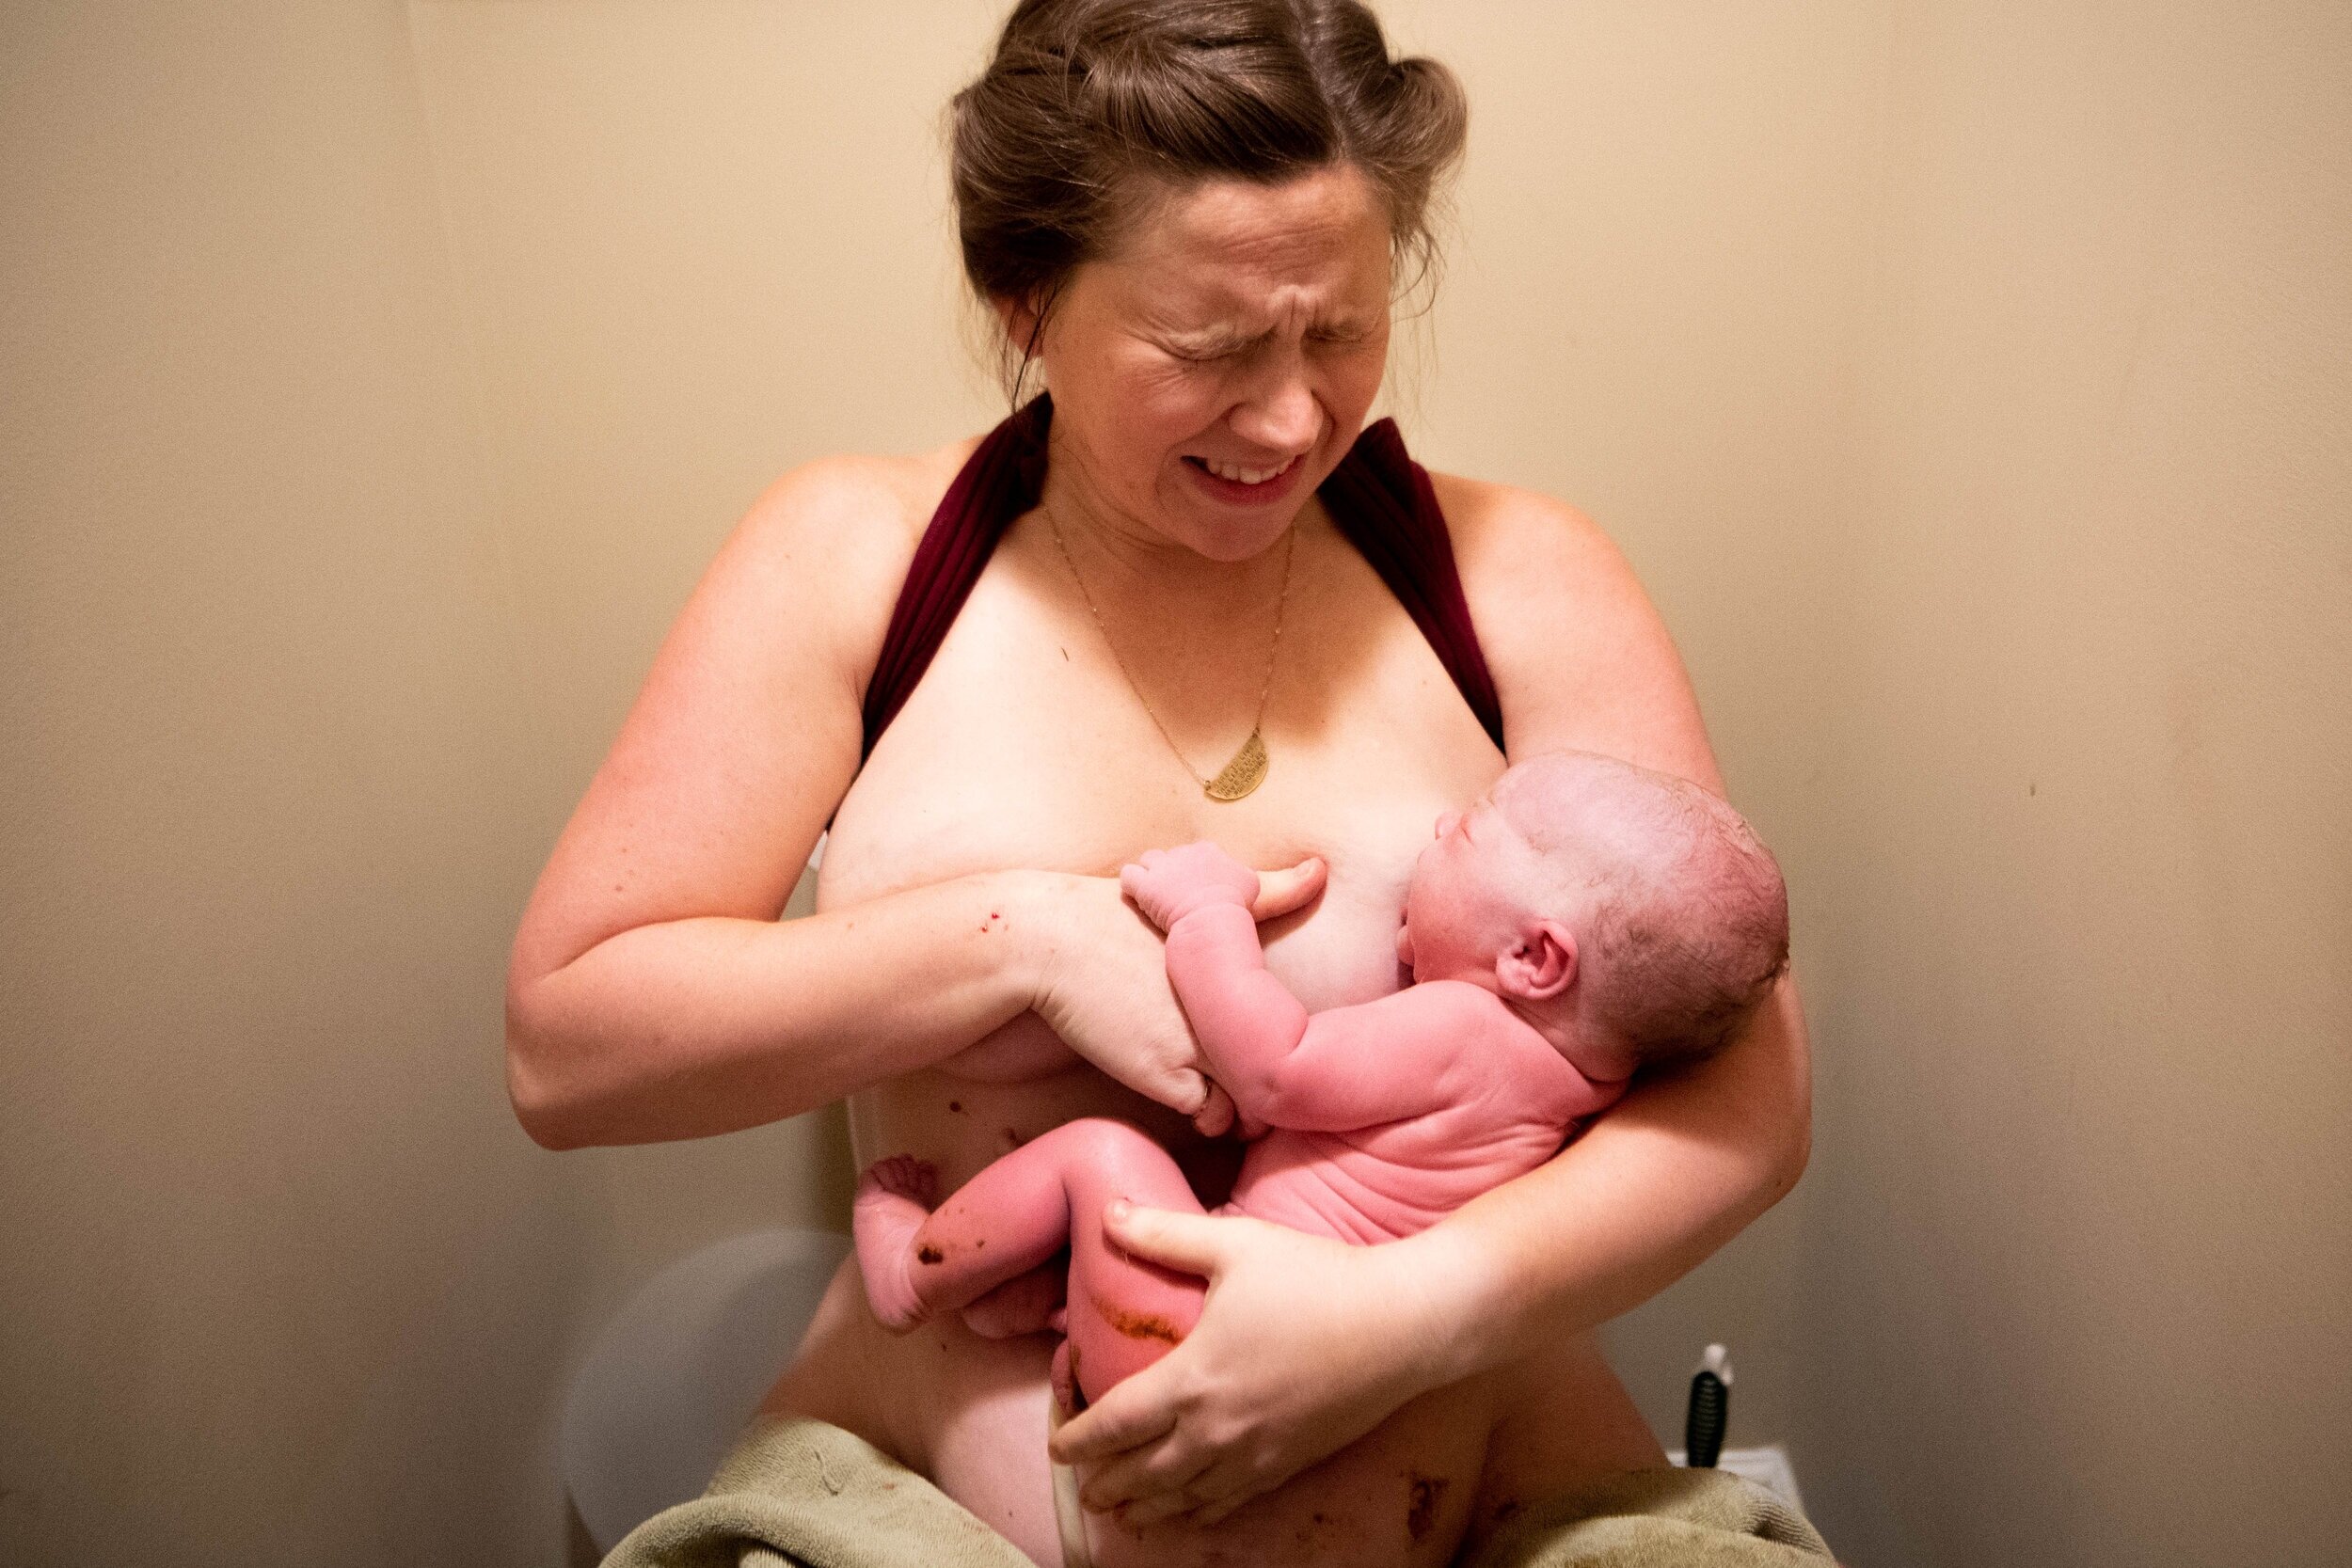  Beth Wehmeyer holds her son Henry Hudson for the first time after giving birth at their home Saturday, Aug. 24, 2019, outside Lebanon city limits. Women across rural Tennessee are choosing home births for many reasons, including personalized care, l